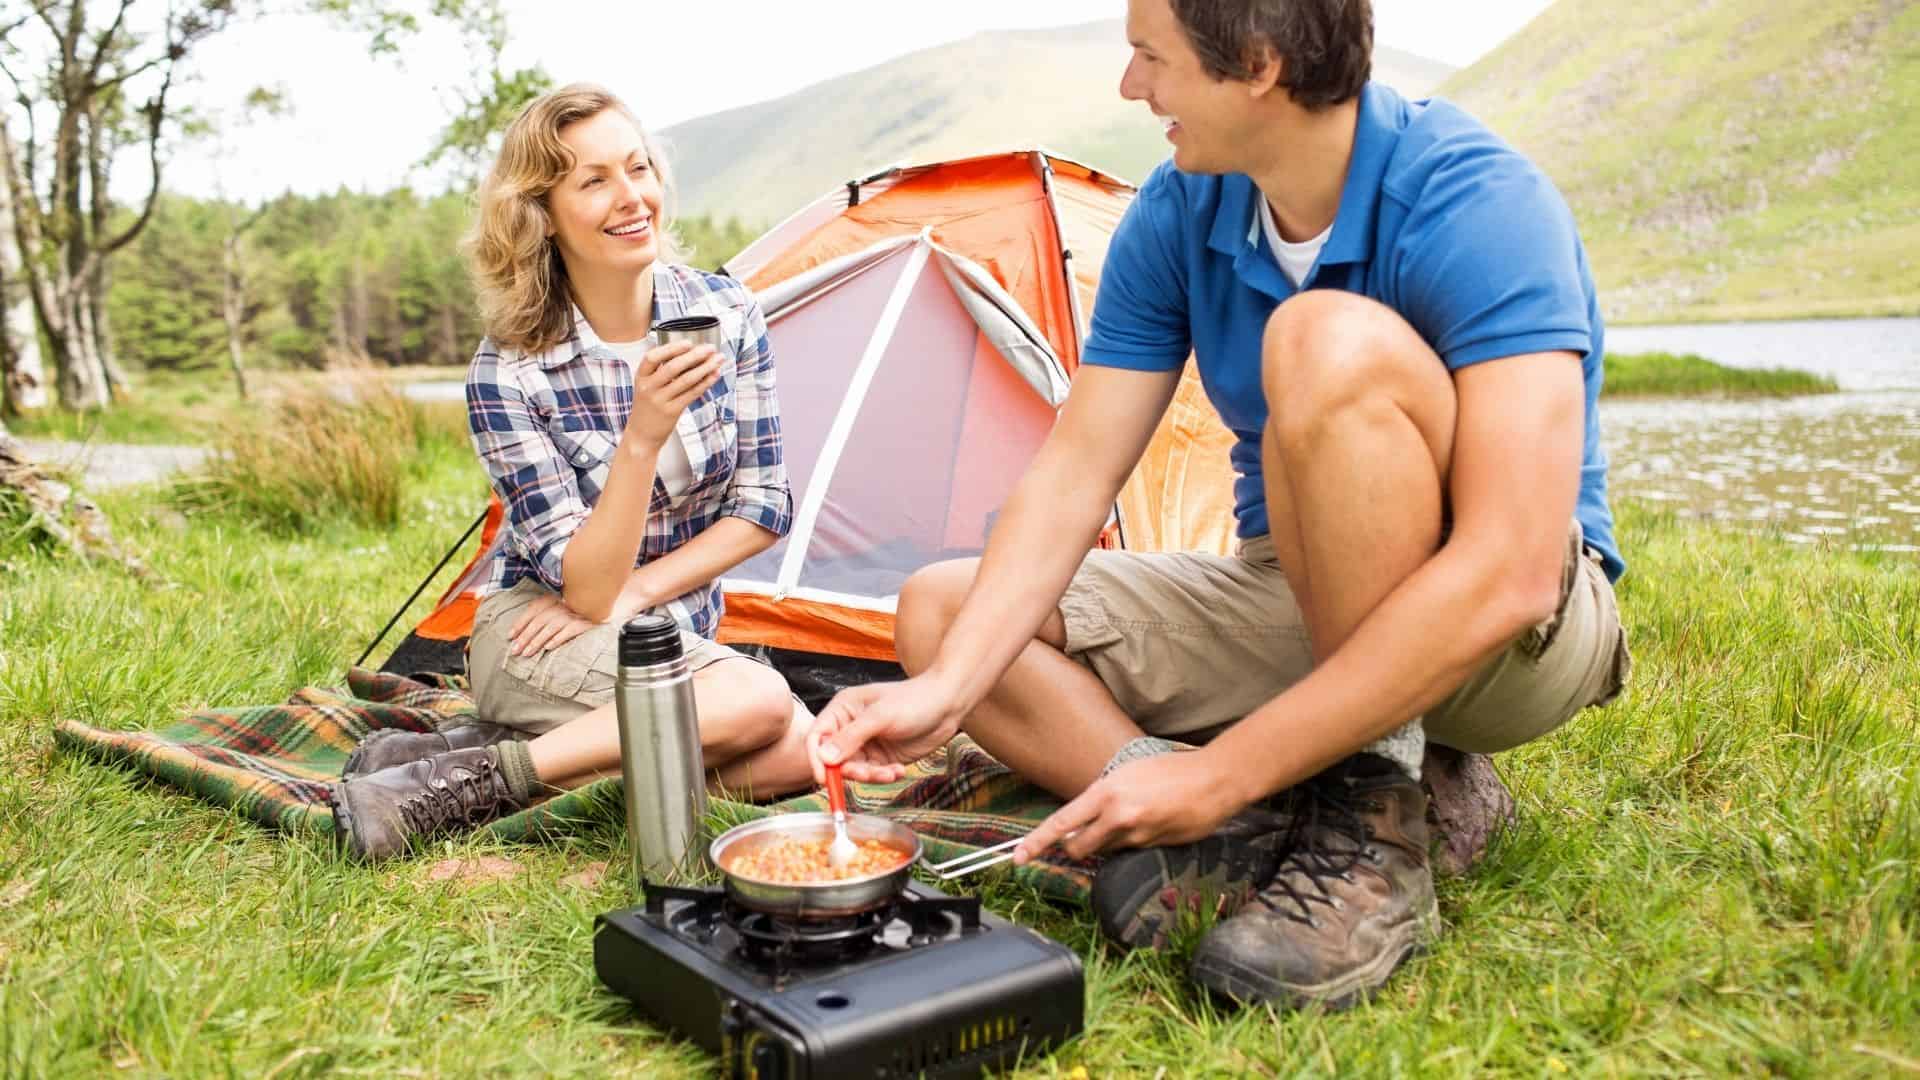 Induction Cooktop vs Gas in Campervan: Pros & Cons for Cooking